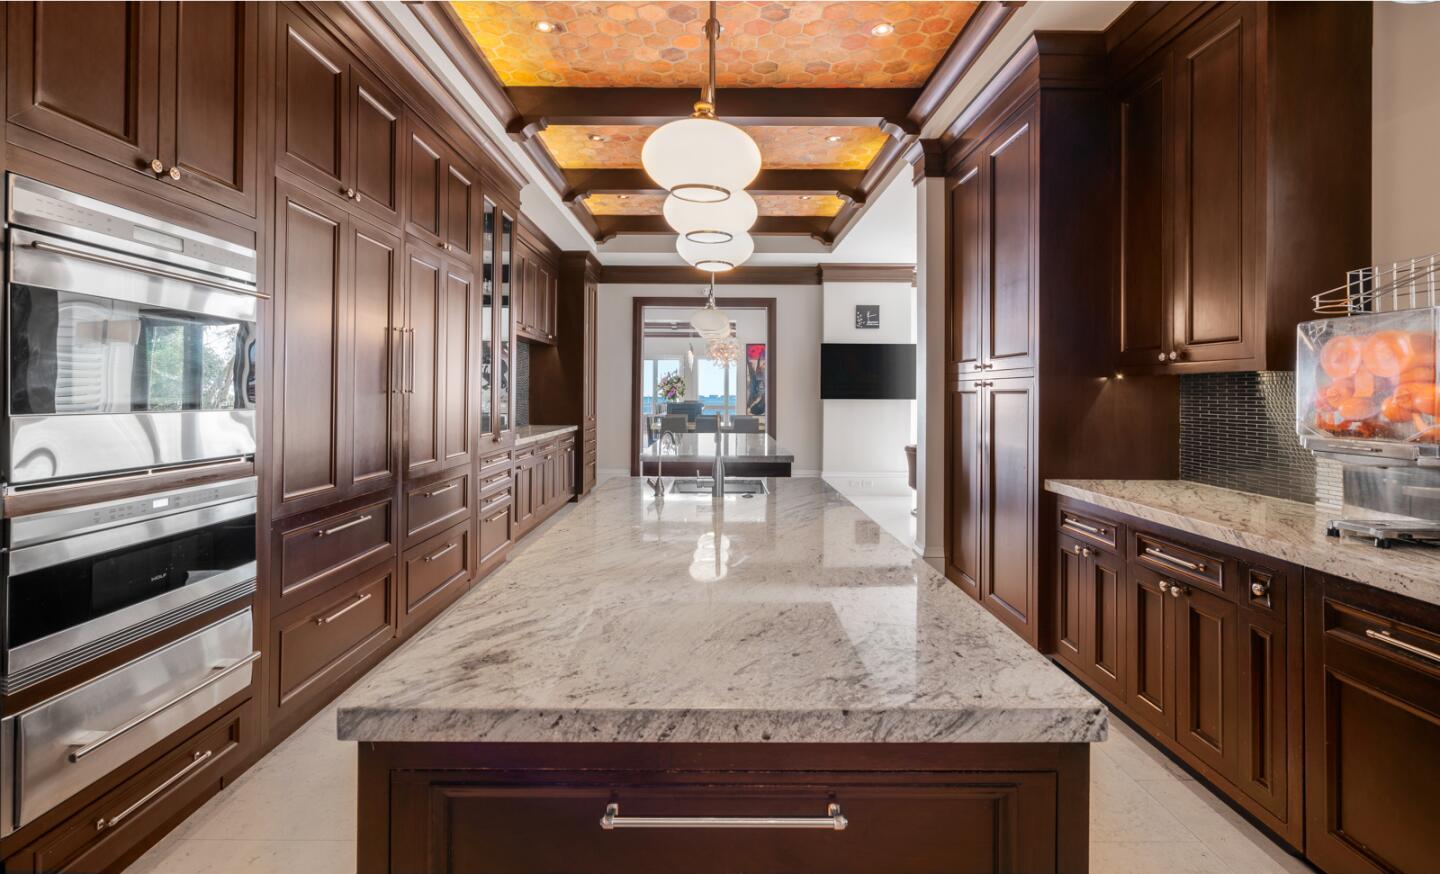 A long center island in the kitchen with a marble counter top.